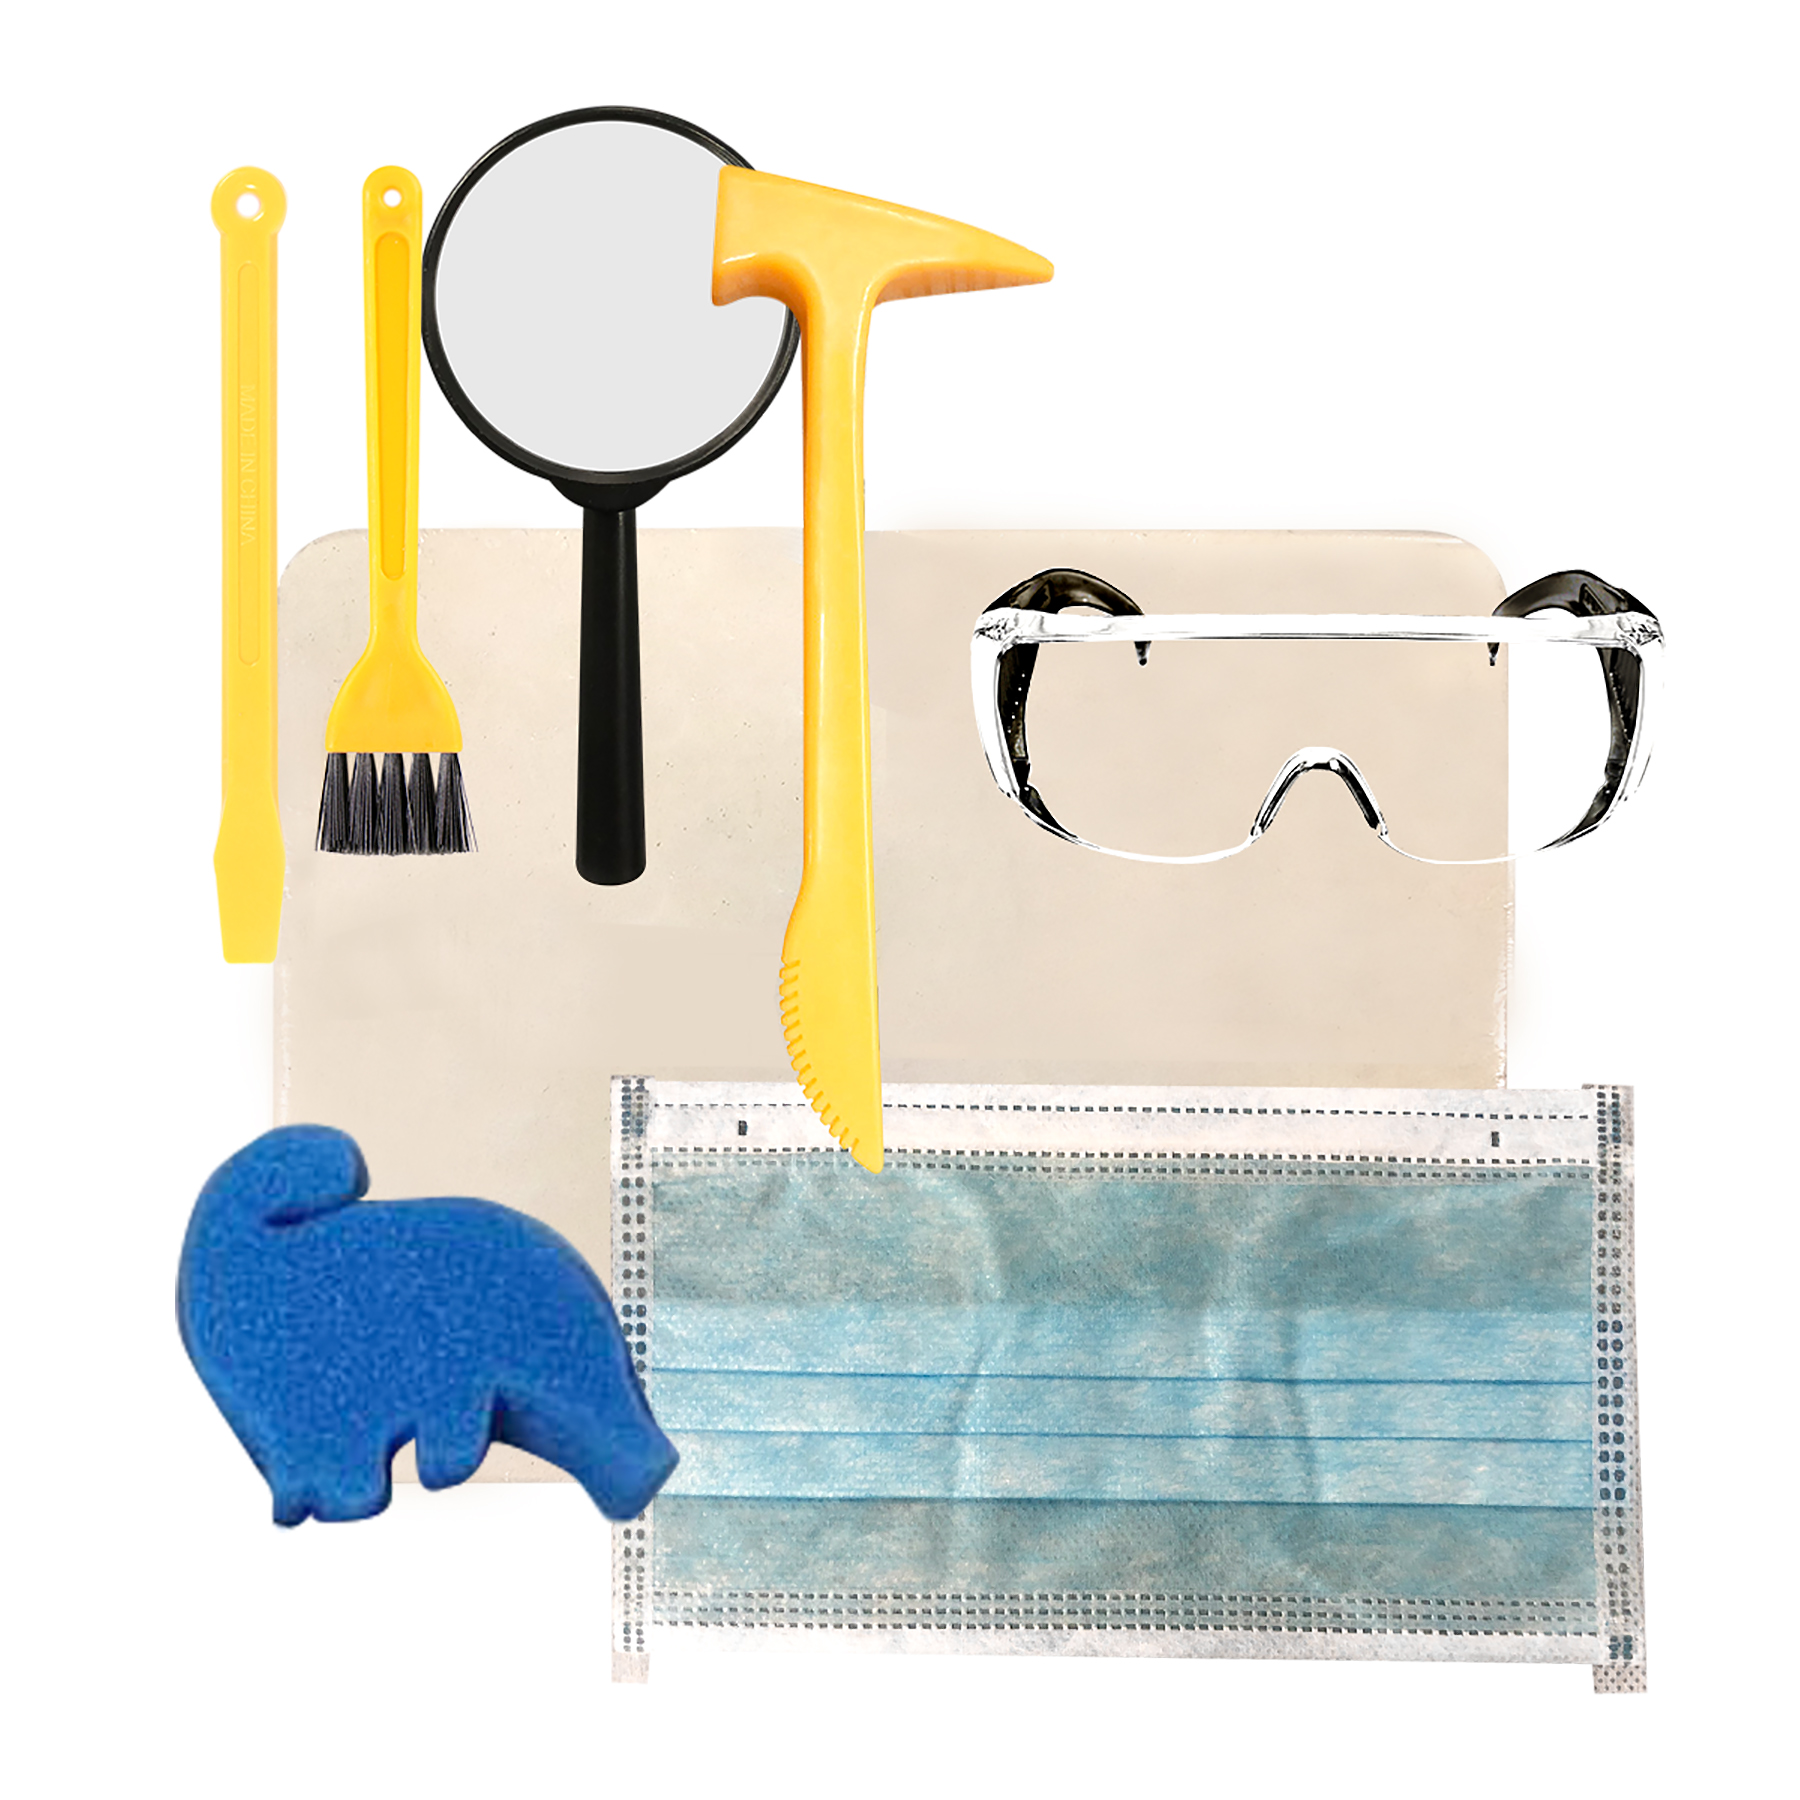 HamiltonBuhl Paleo Hunter Dig Kit for STEAM Education - Triceratops Rex image number null